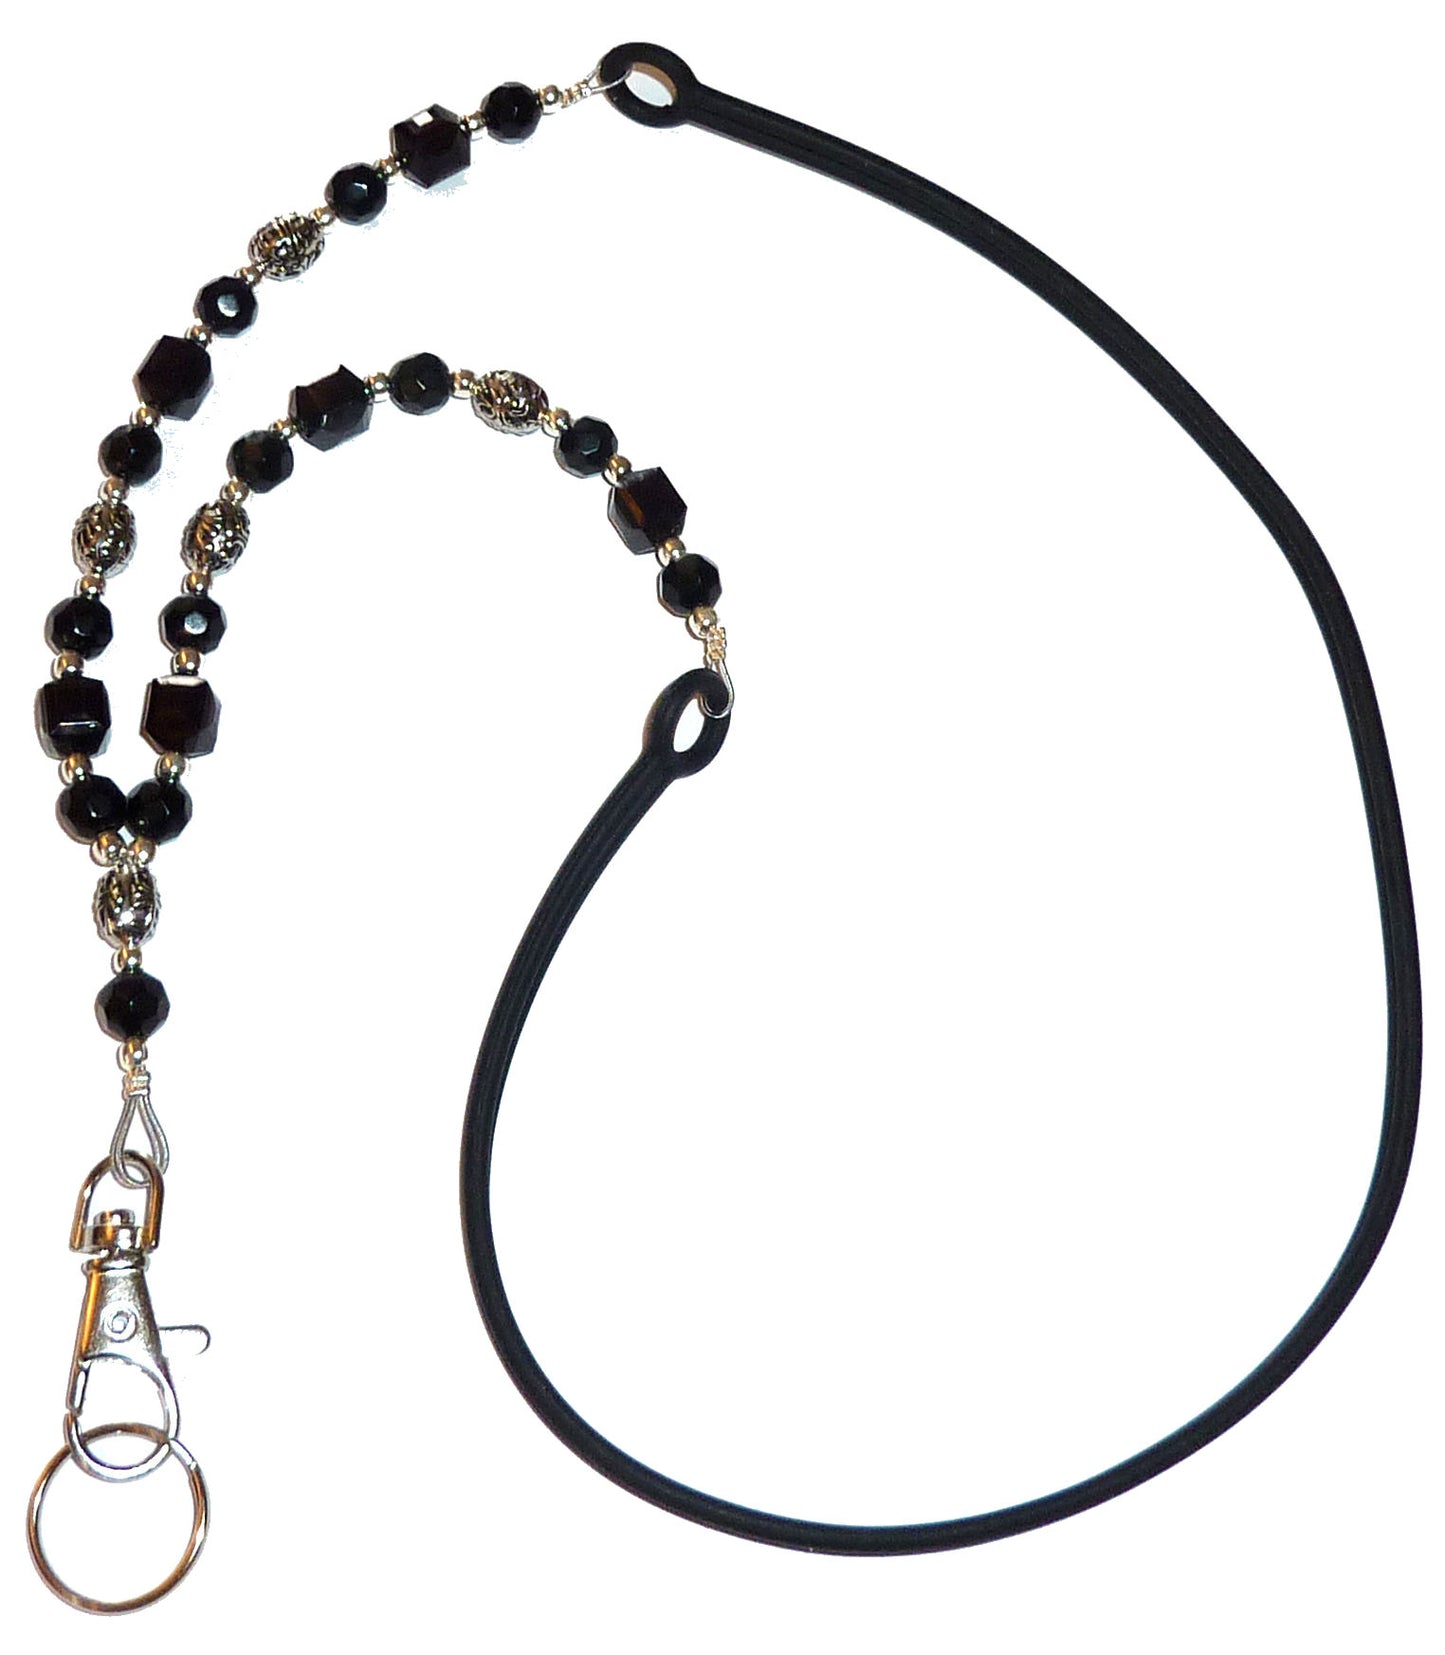 Black Beaded Cell Phone Lanyard - Silicone Strap